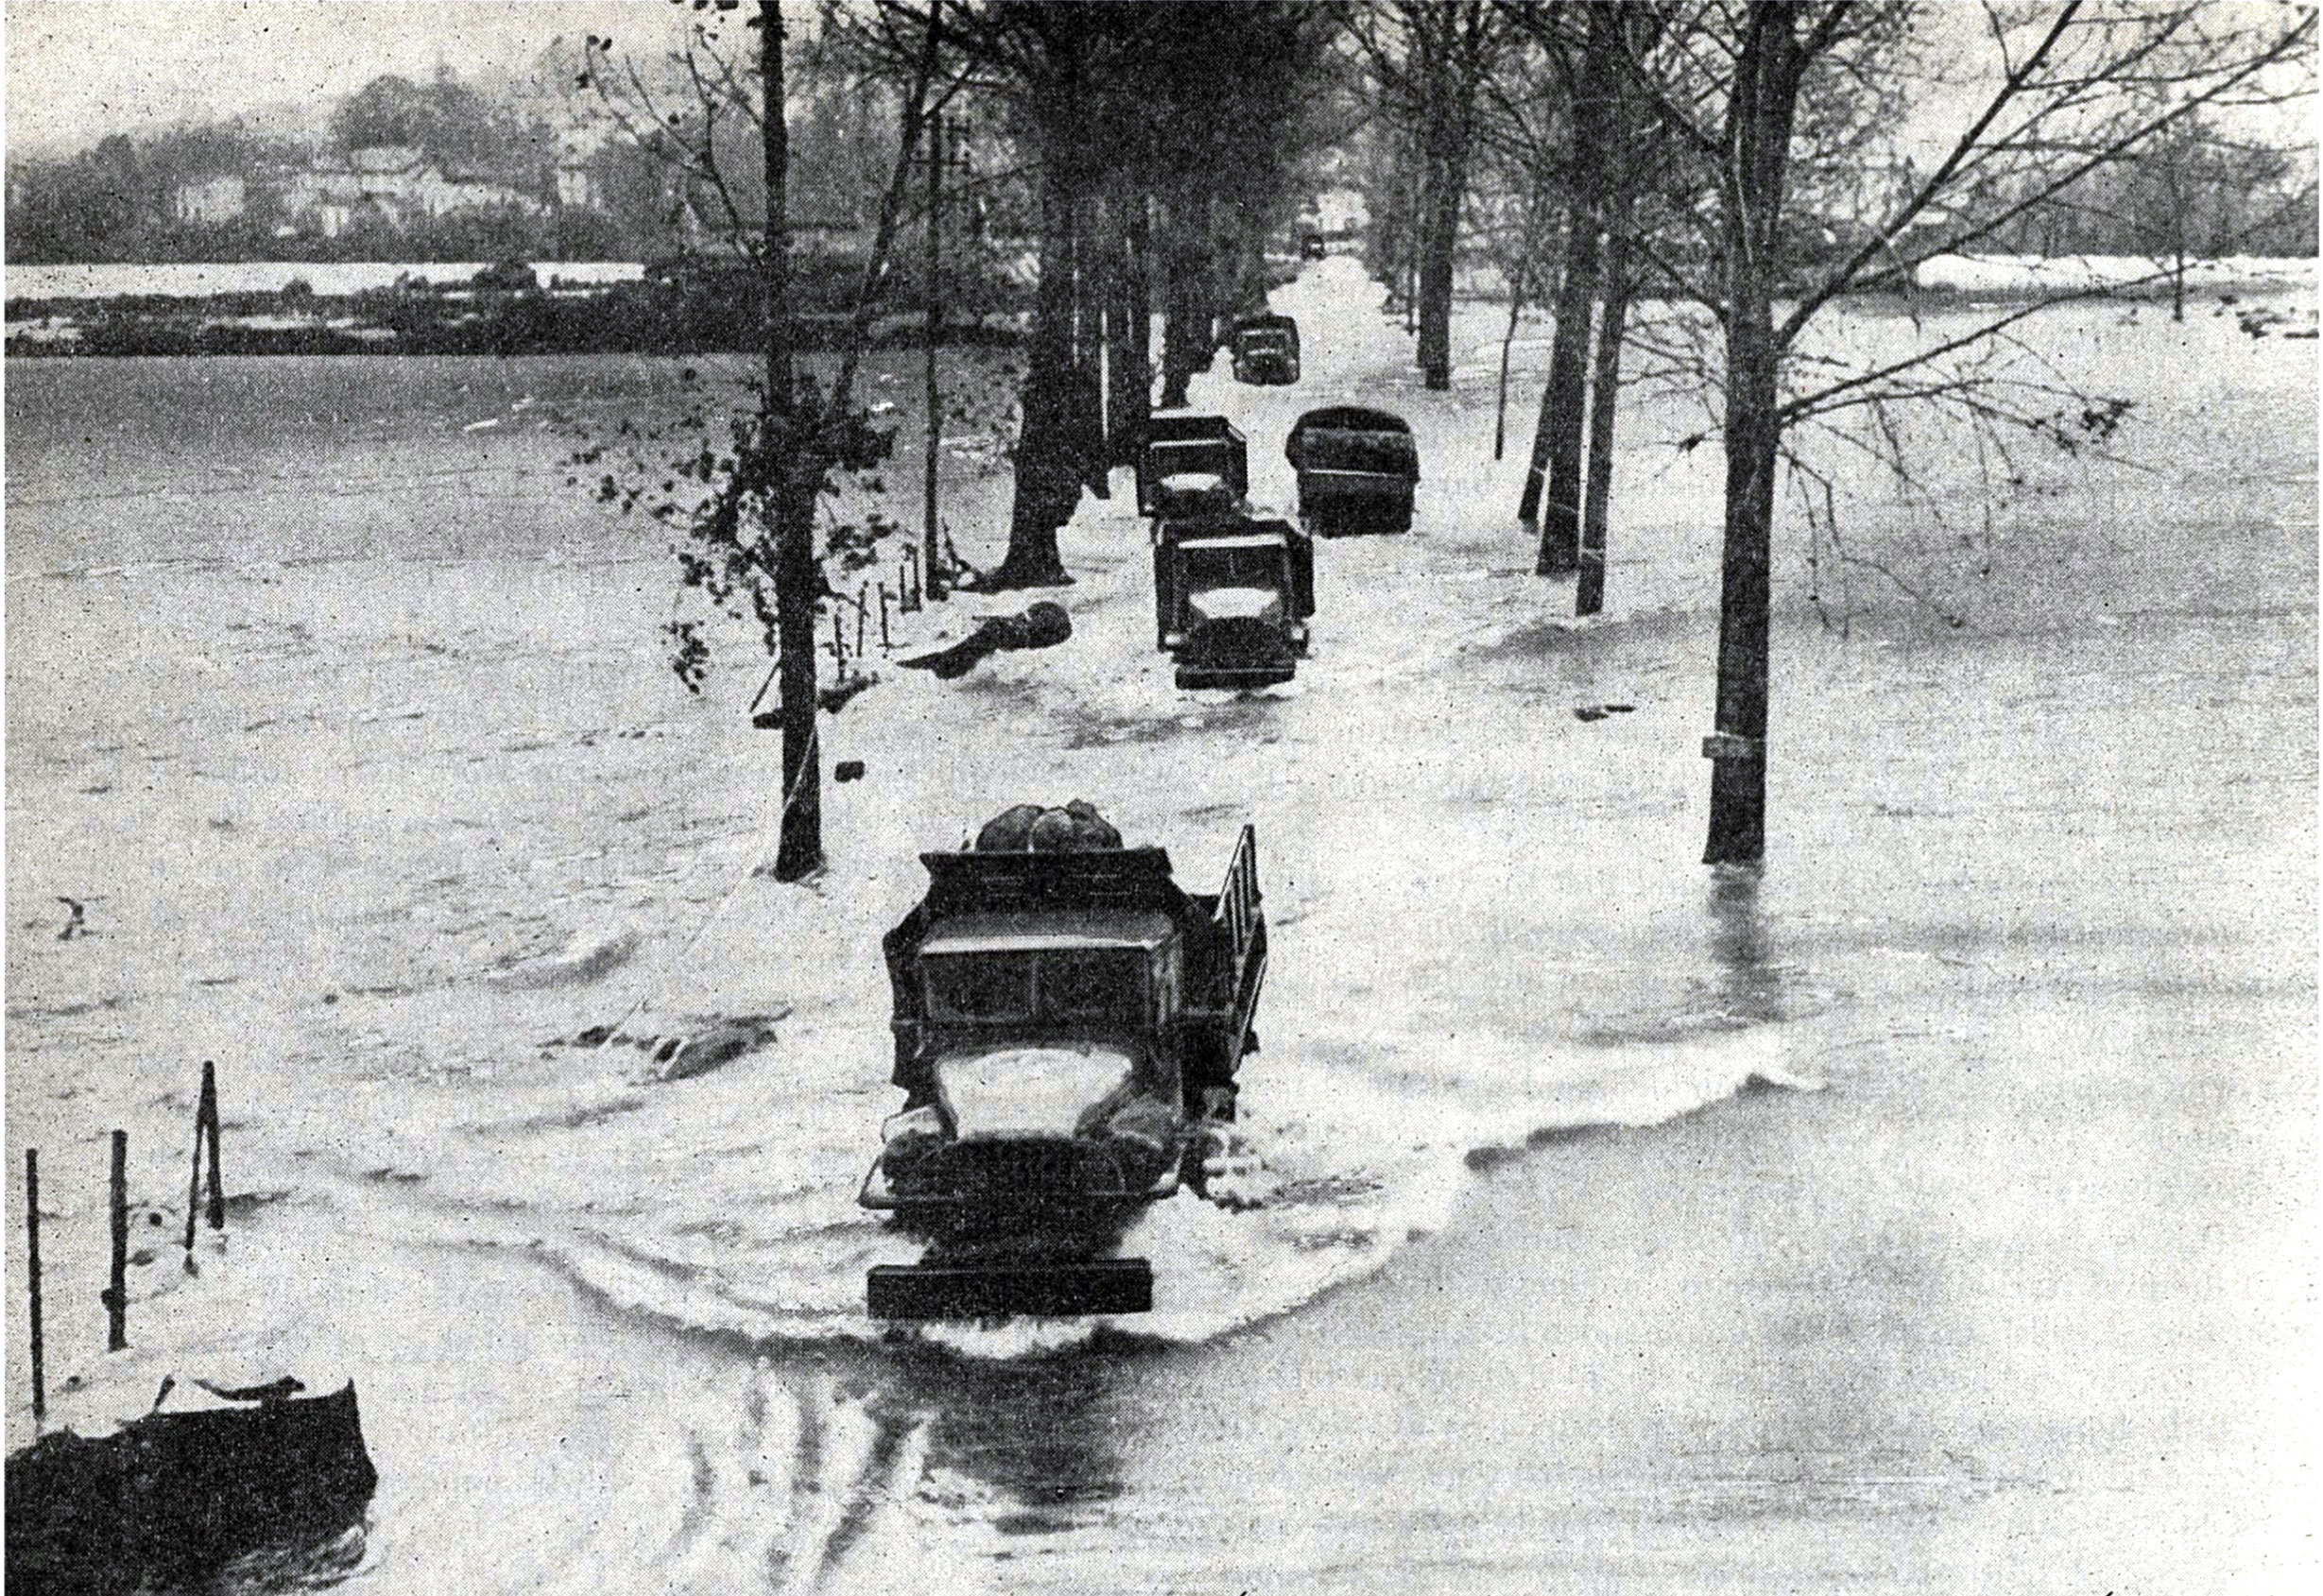 U.S. Army trucks driving through watery roadway. (Photo courtesy of the U.S. Army)